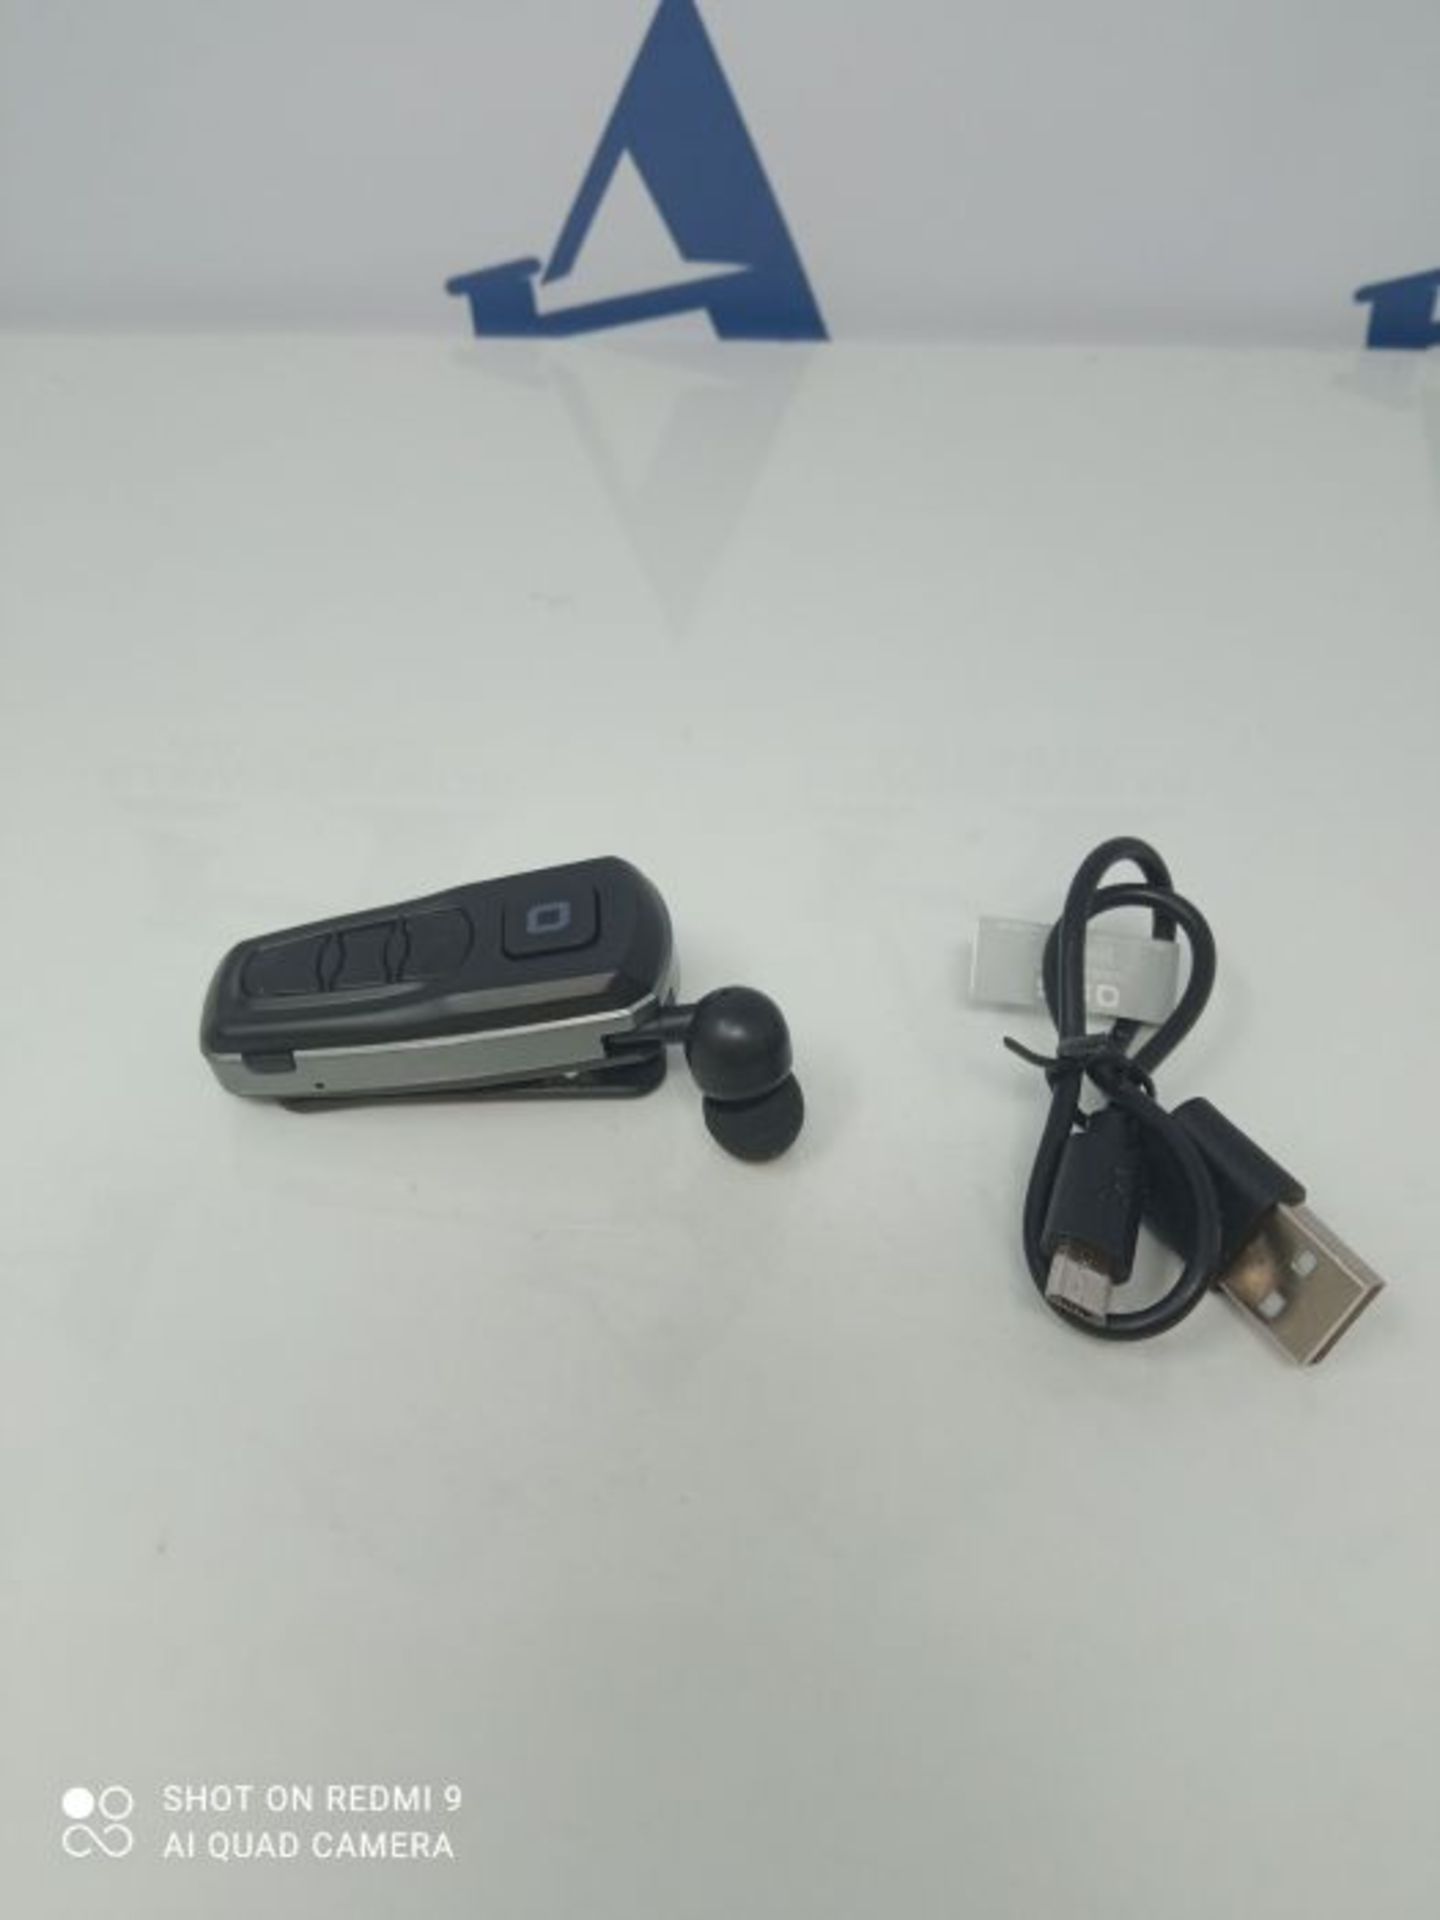 SBS Bluetooth Headset with Clip and Roll-up Wire Multipoint Technology to connect 2 de - Image 6 of 6